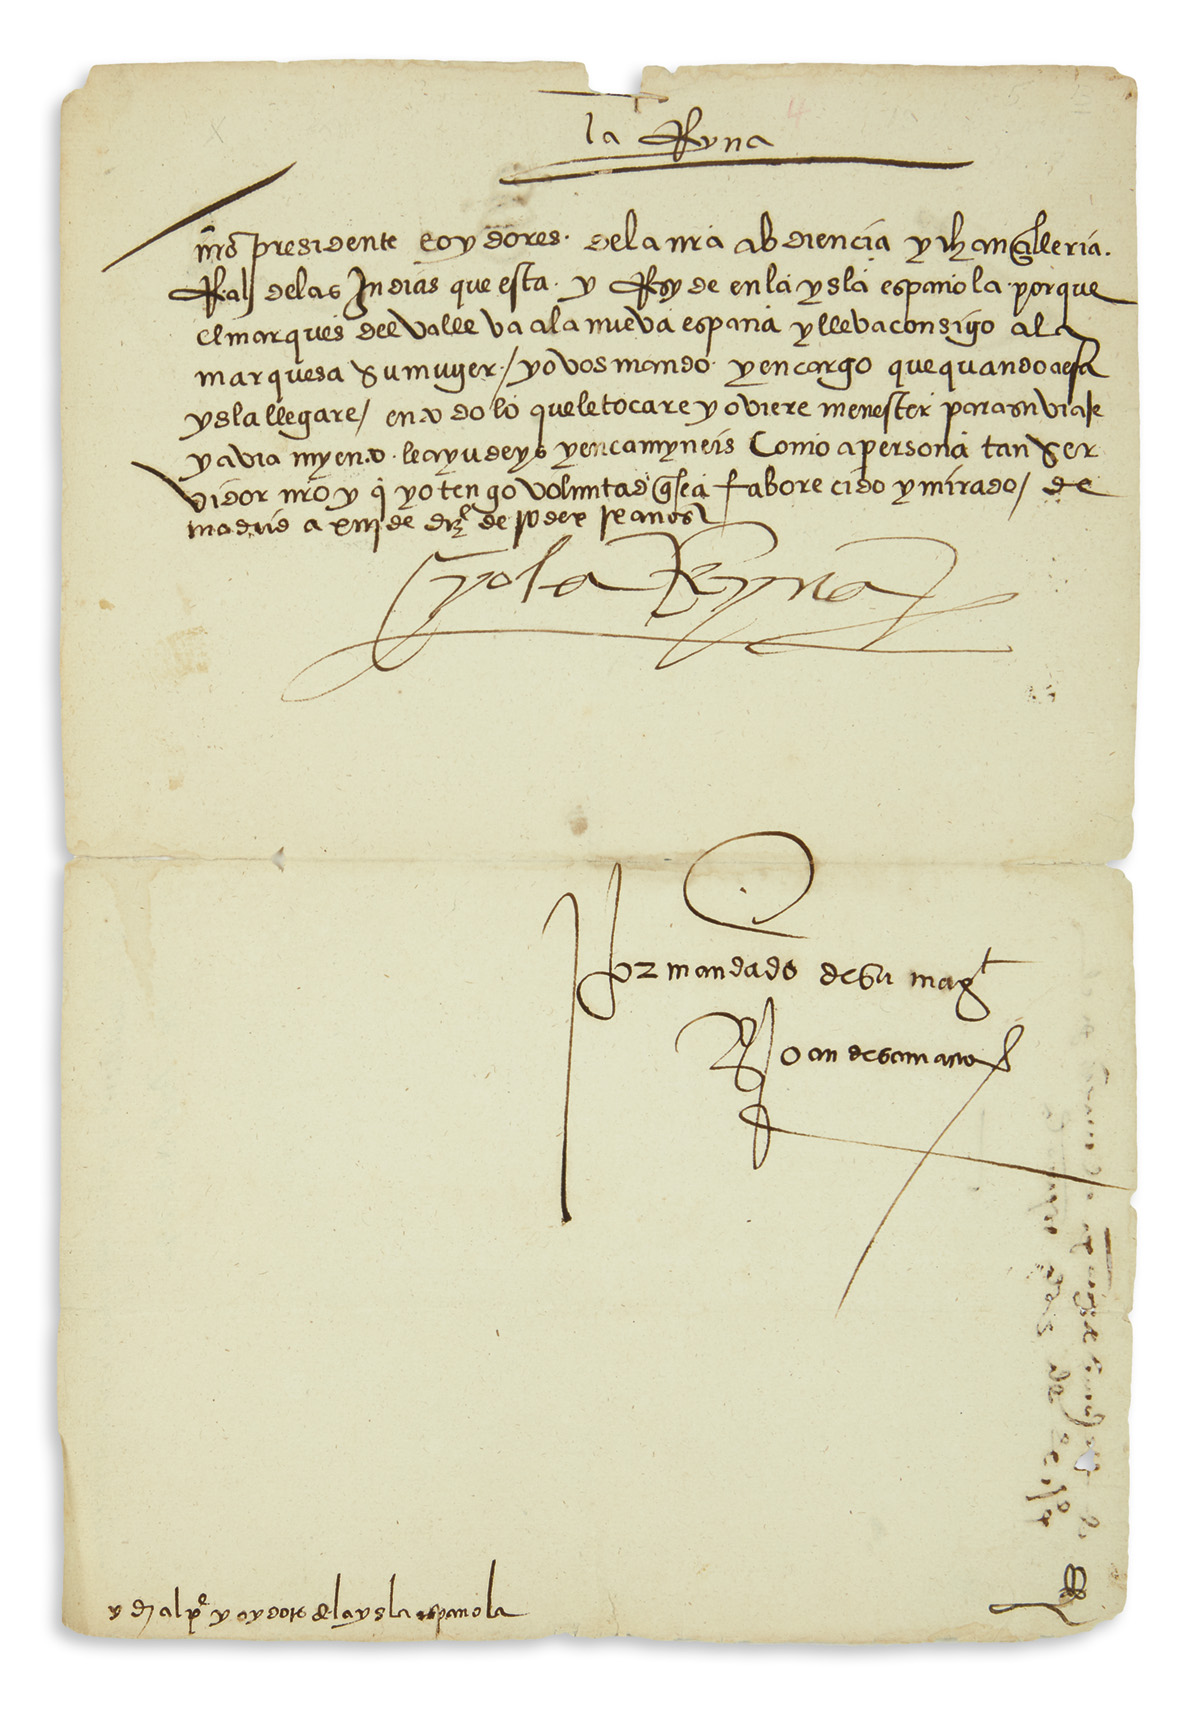 (MEXICAN MANUSCRIPTS.) Isabella of Portugal, Queen of Spain. Royal decree authorizing passage for Cortés as he returned to New Spain.